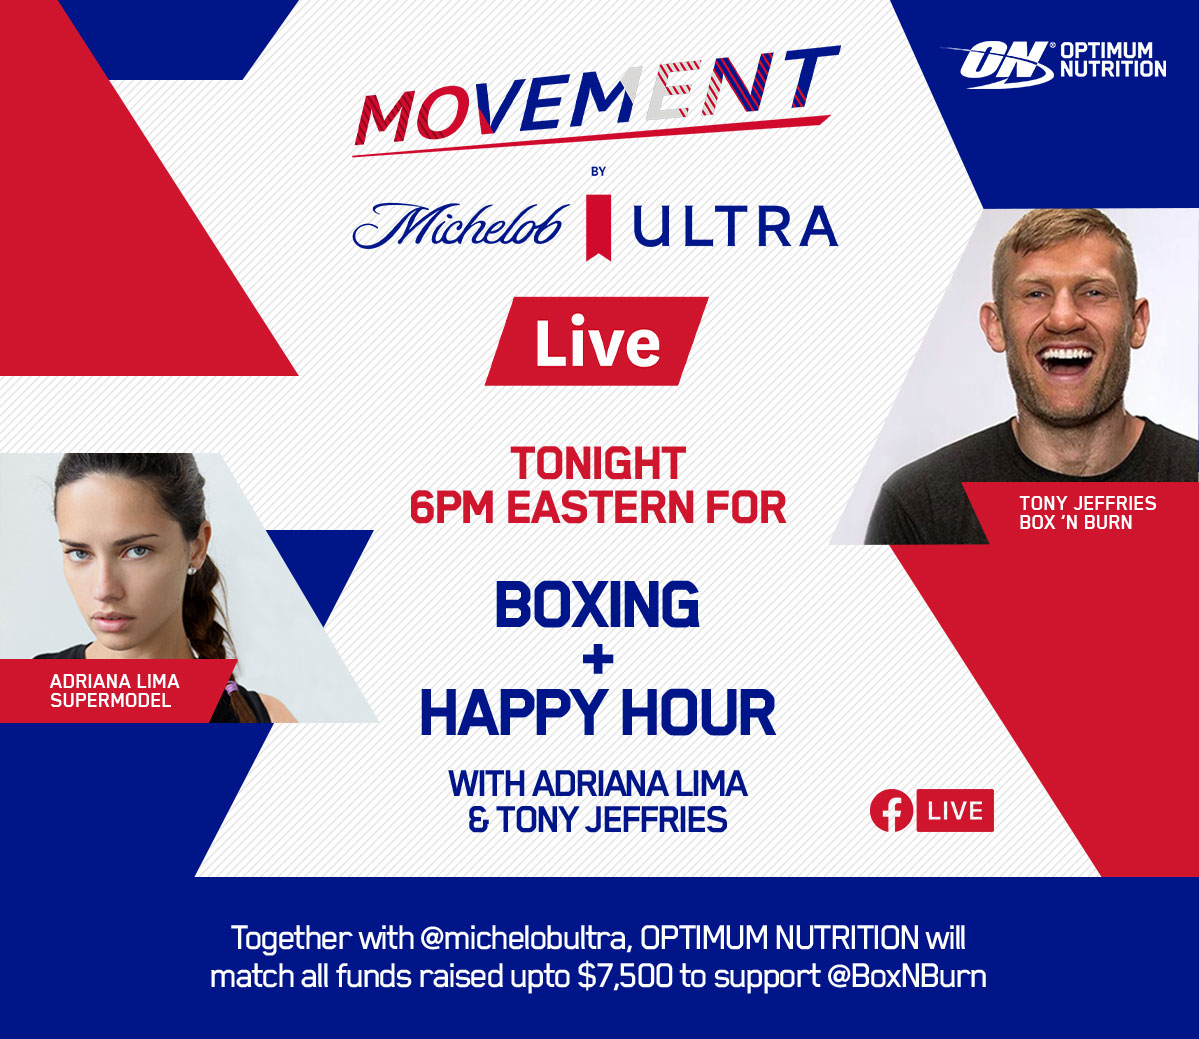 MOVEMENT BY MICHELOB ULTRA WORKOUT